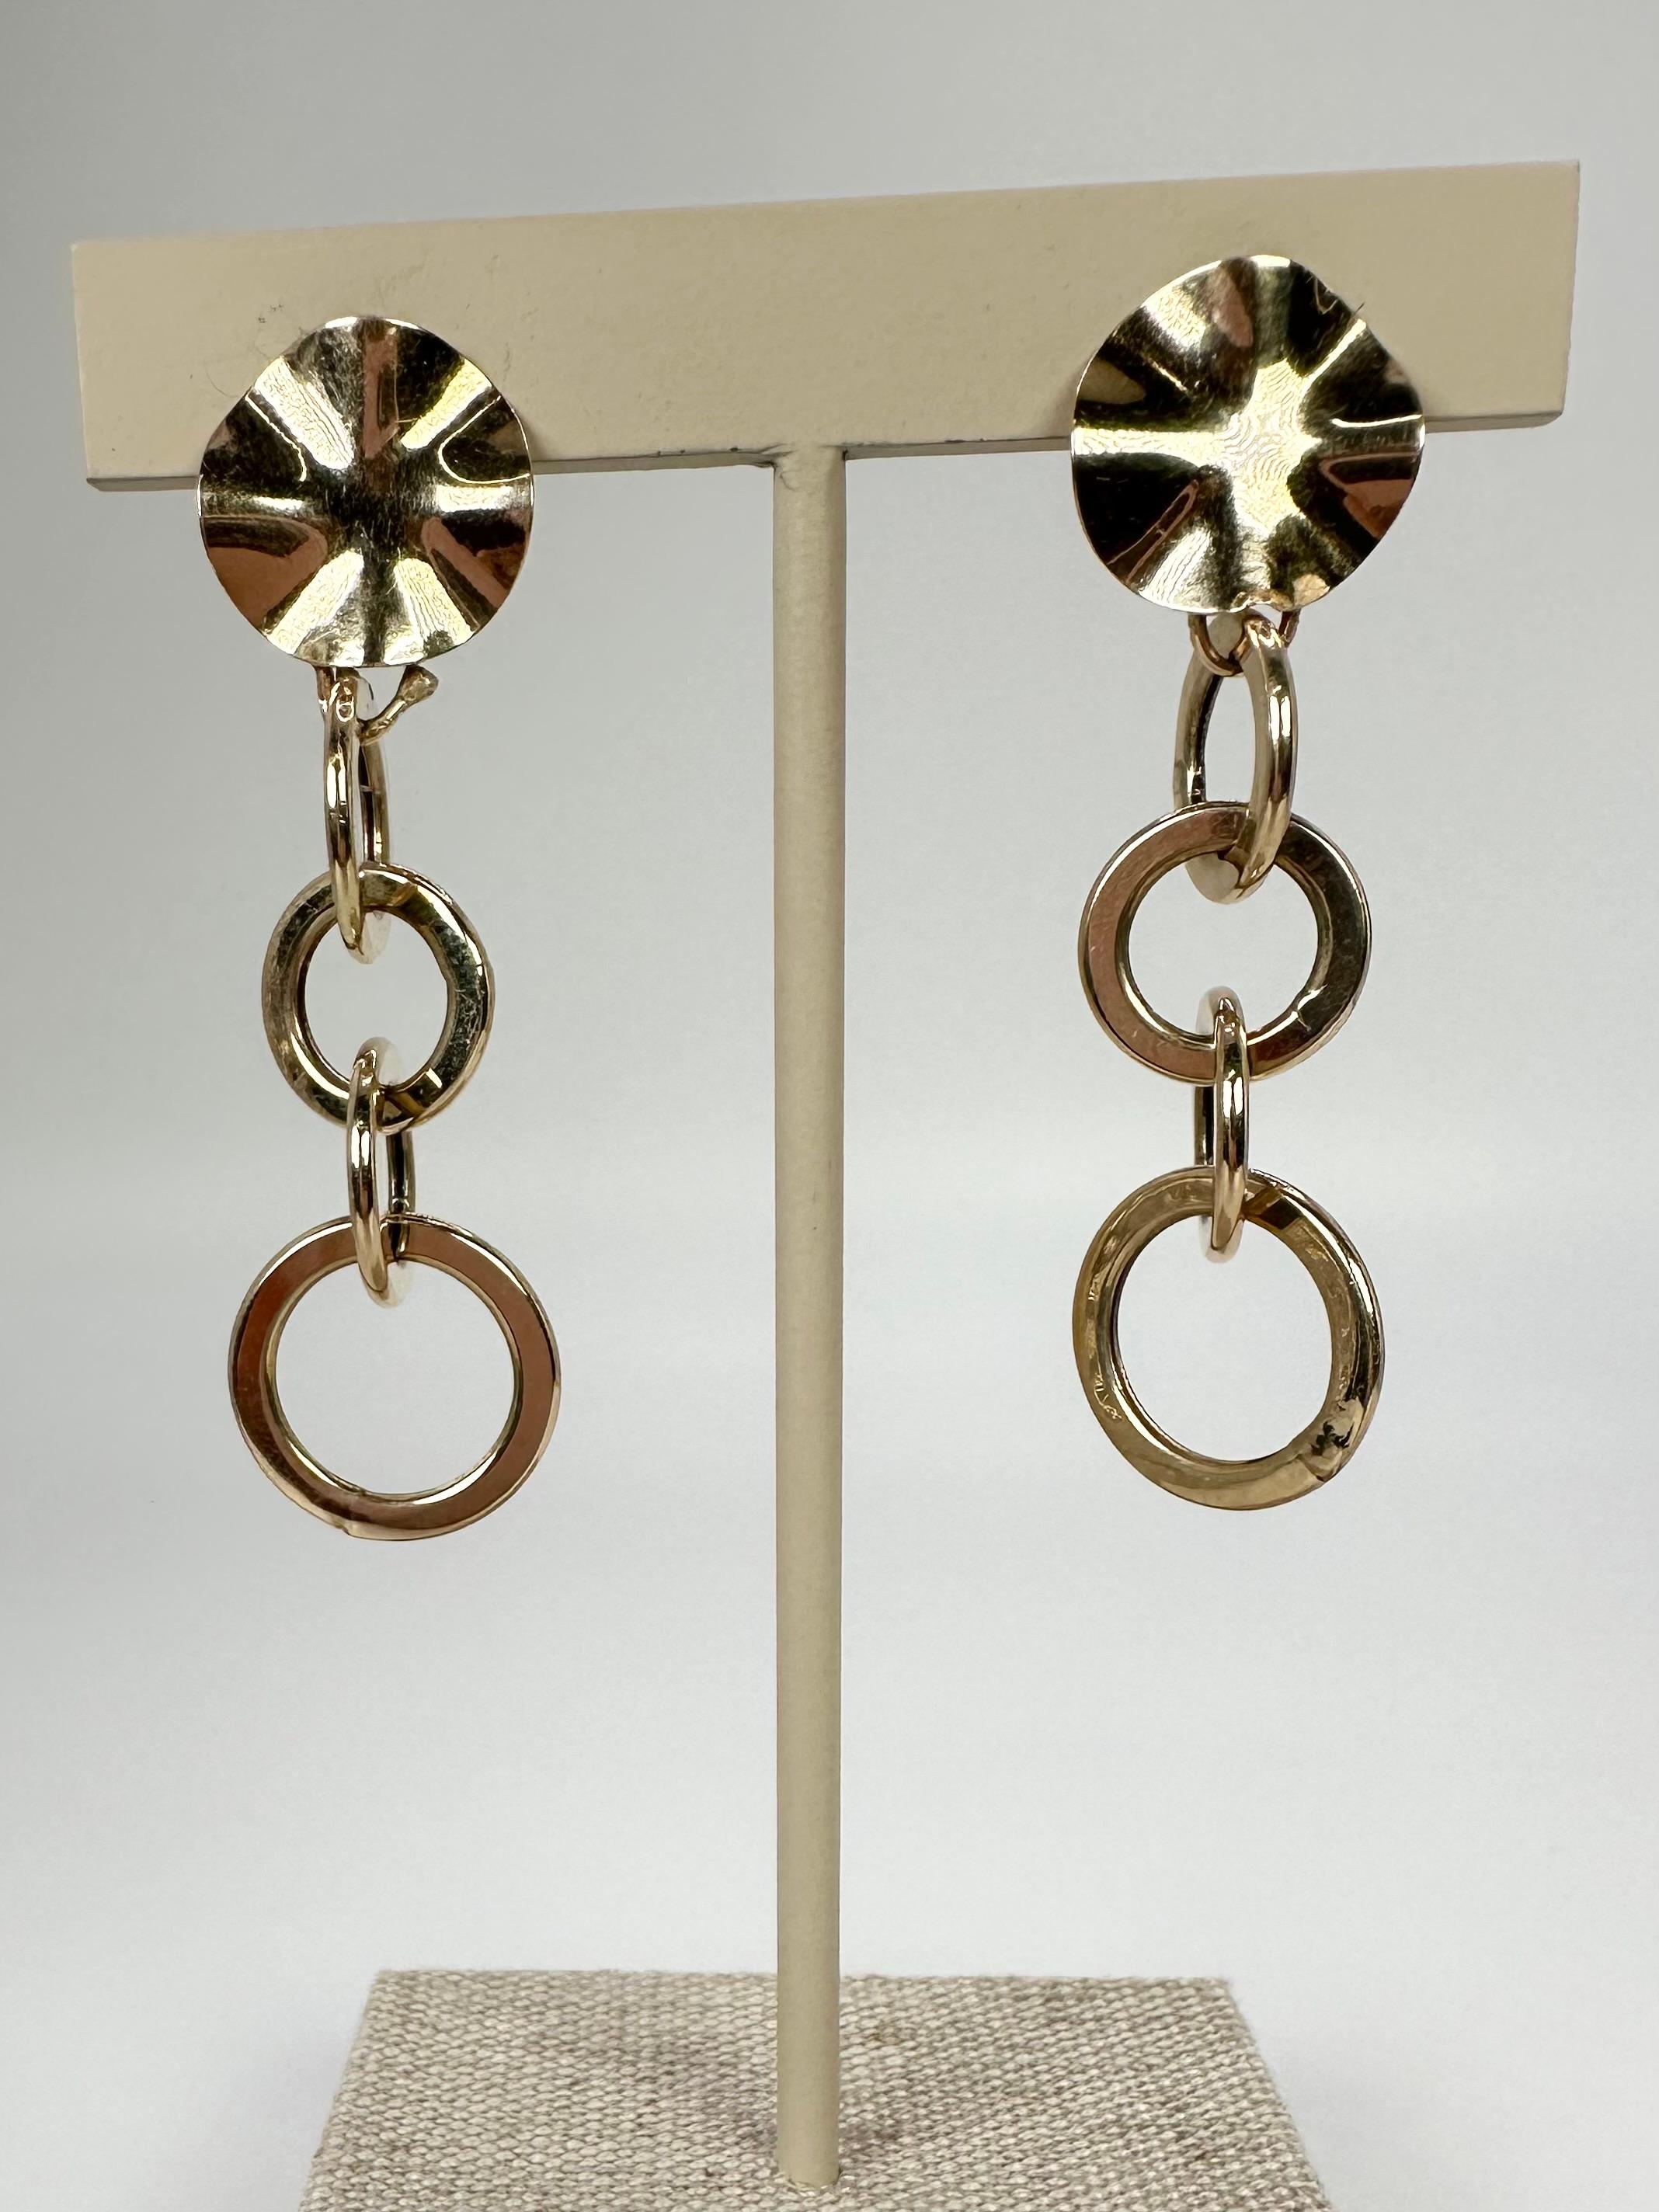 Plain solid gold earrings in floral design in 14KT yellow gold. The earrings are clip-on.
ITEM: AFT 425-00024
GRAM WEIGHT: 5.43gr
GOLD: 14KT gold
WIDTH: 15MM large flower
SIZE: about 3 inches

WHAT YOU GET AT STAMPAR JEWELERS:
Stampar Jewelers,